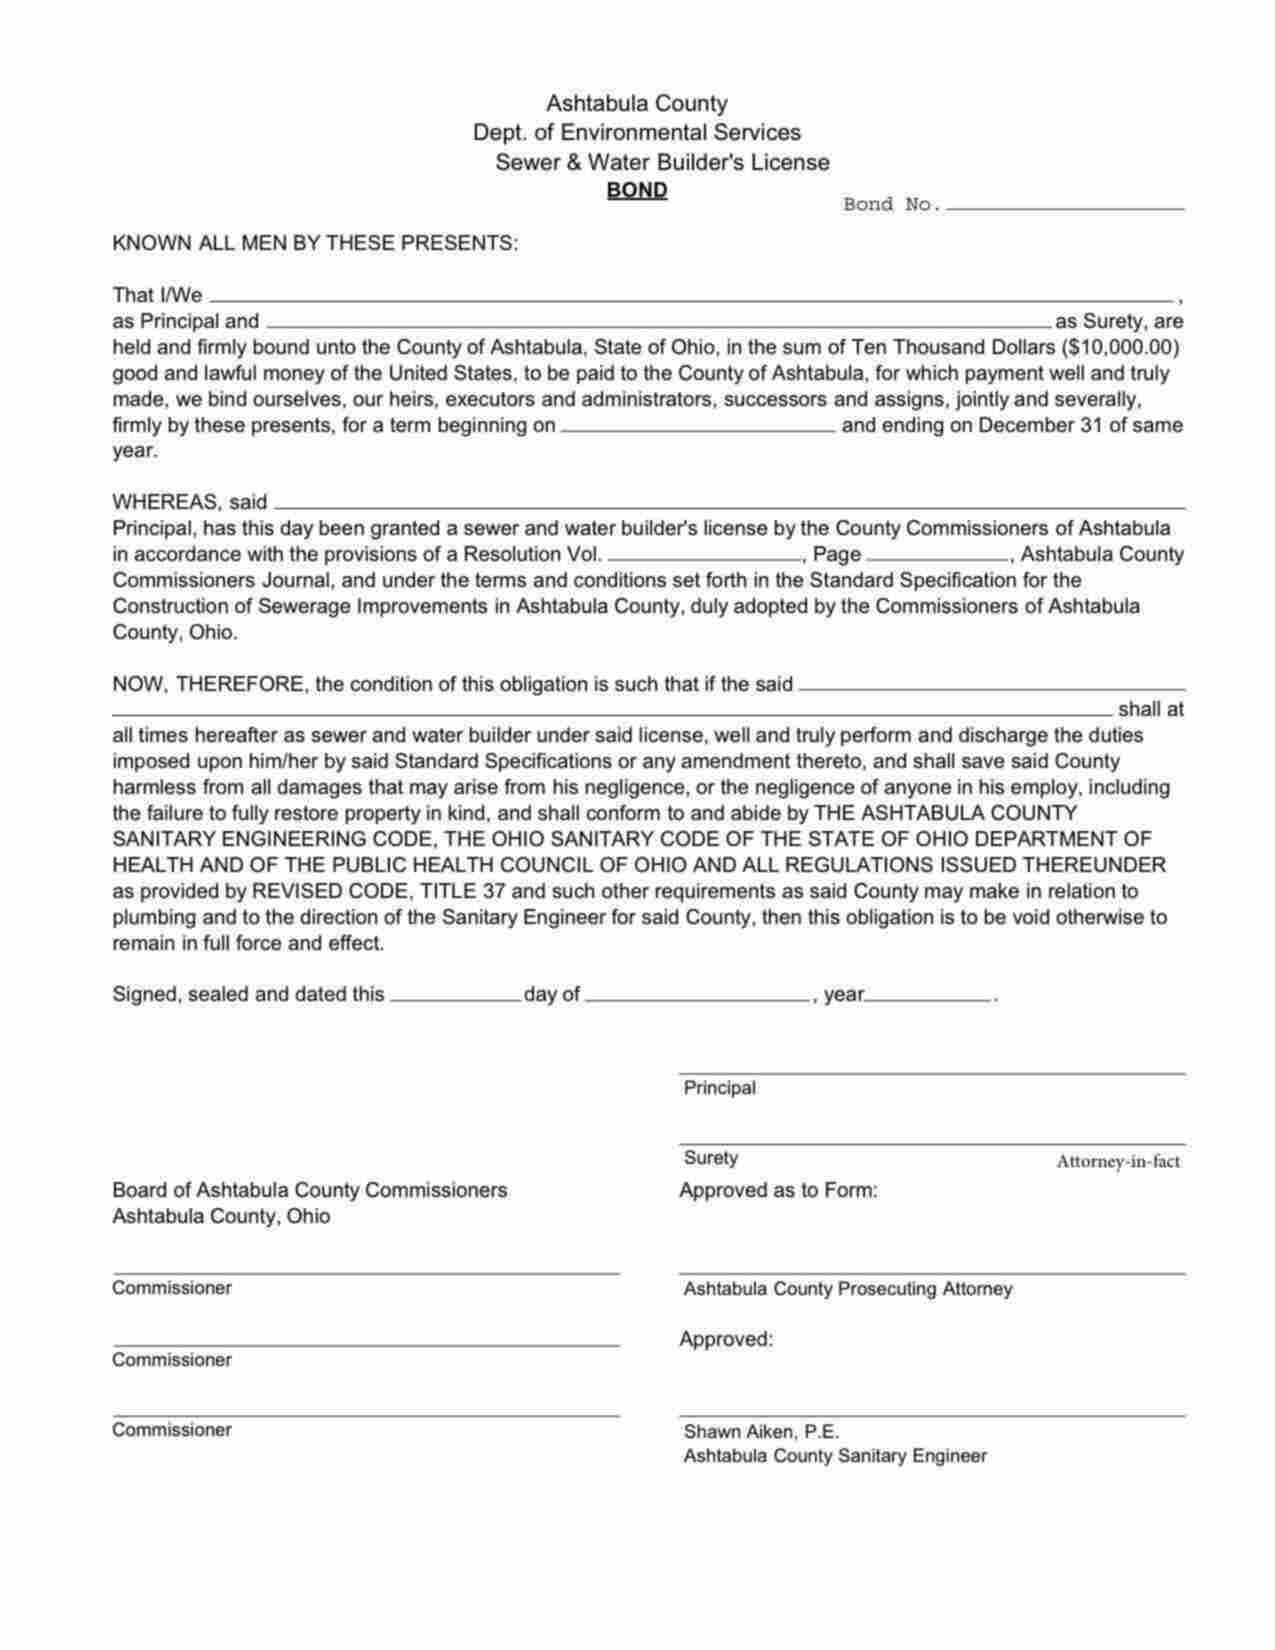 Ohio Sewer and Water Builder's License Bond Form